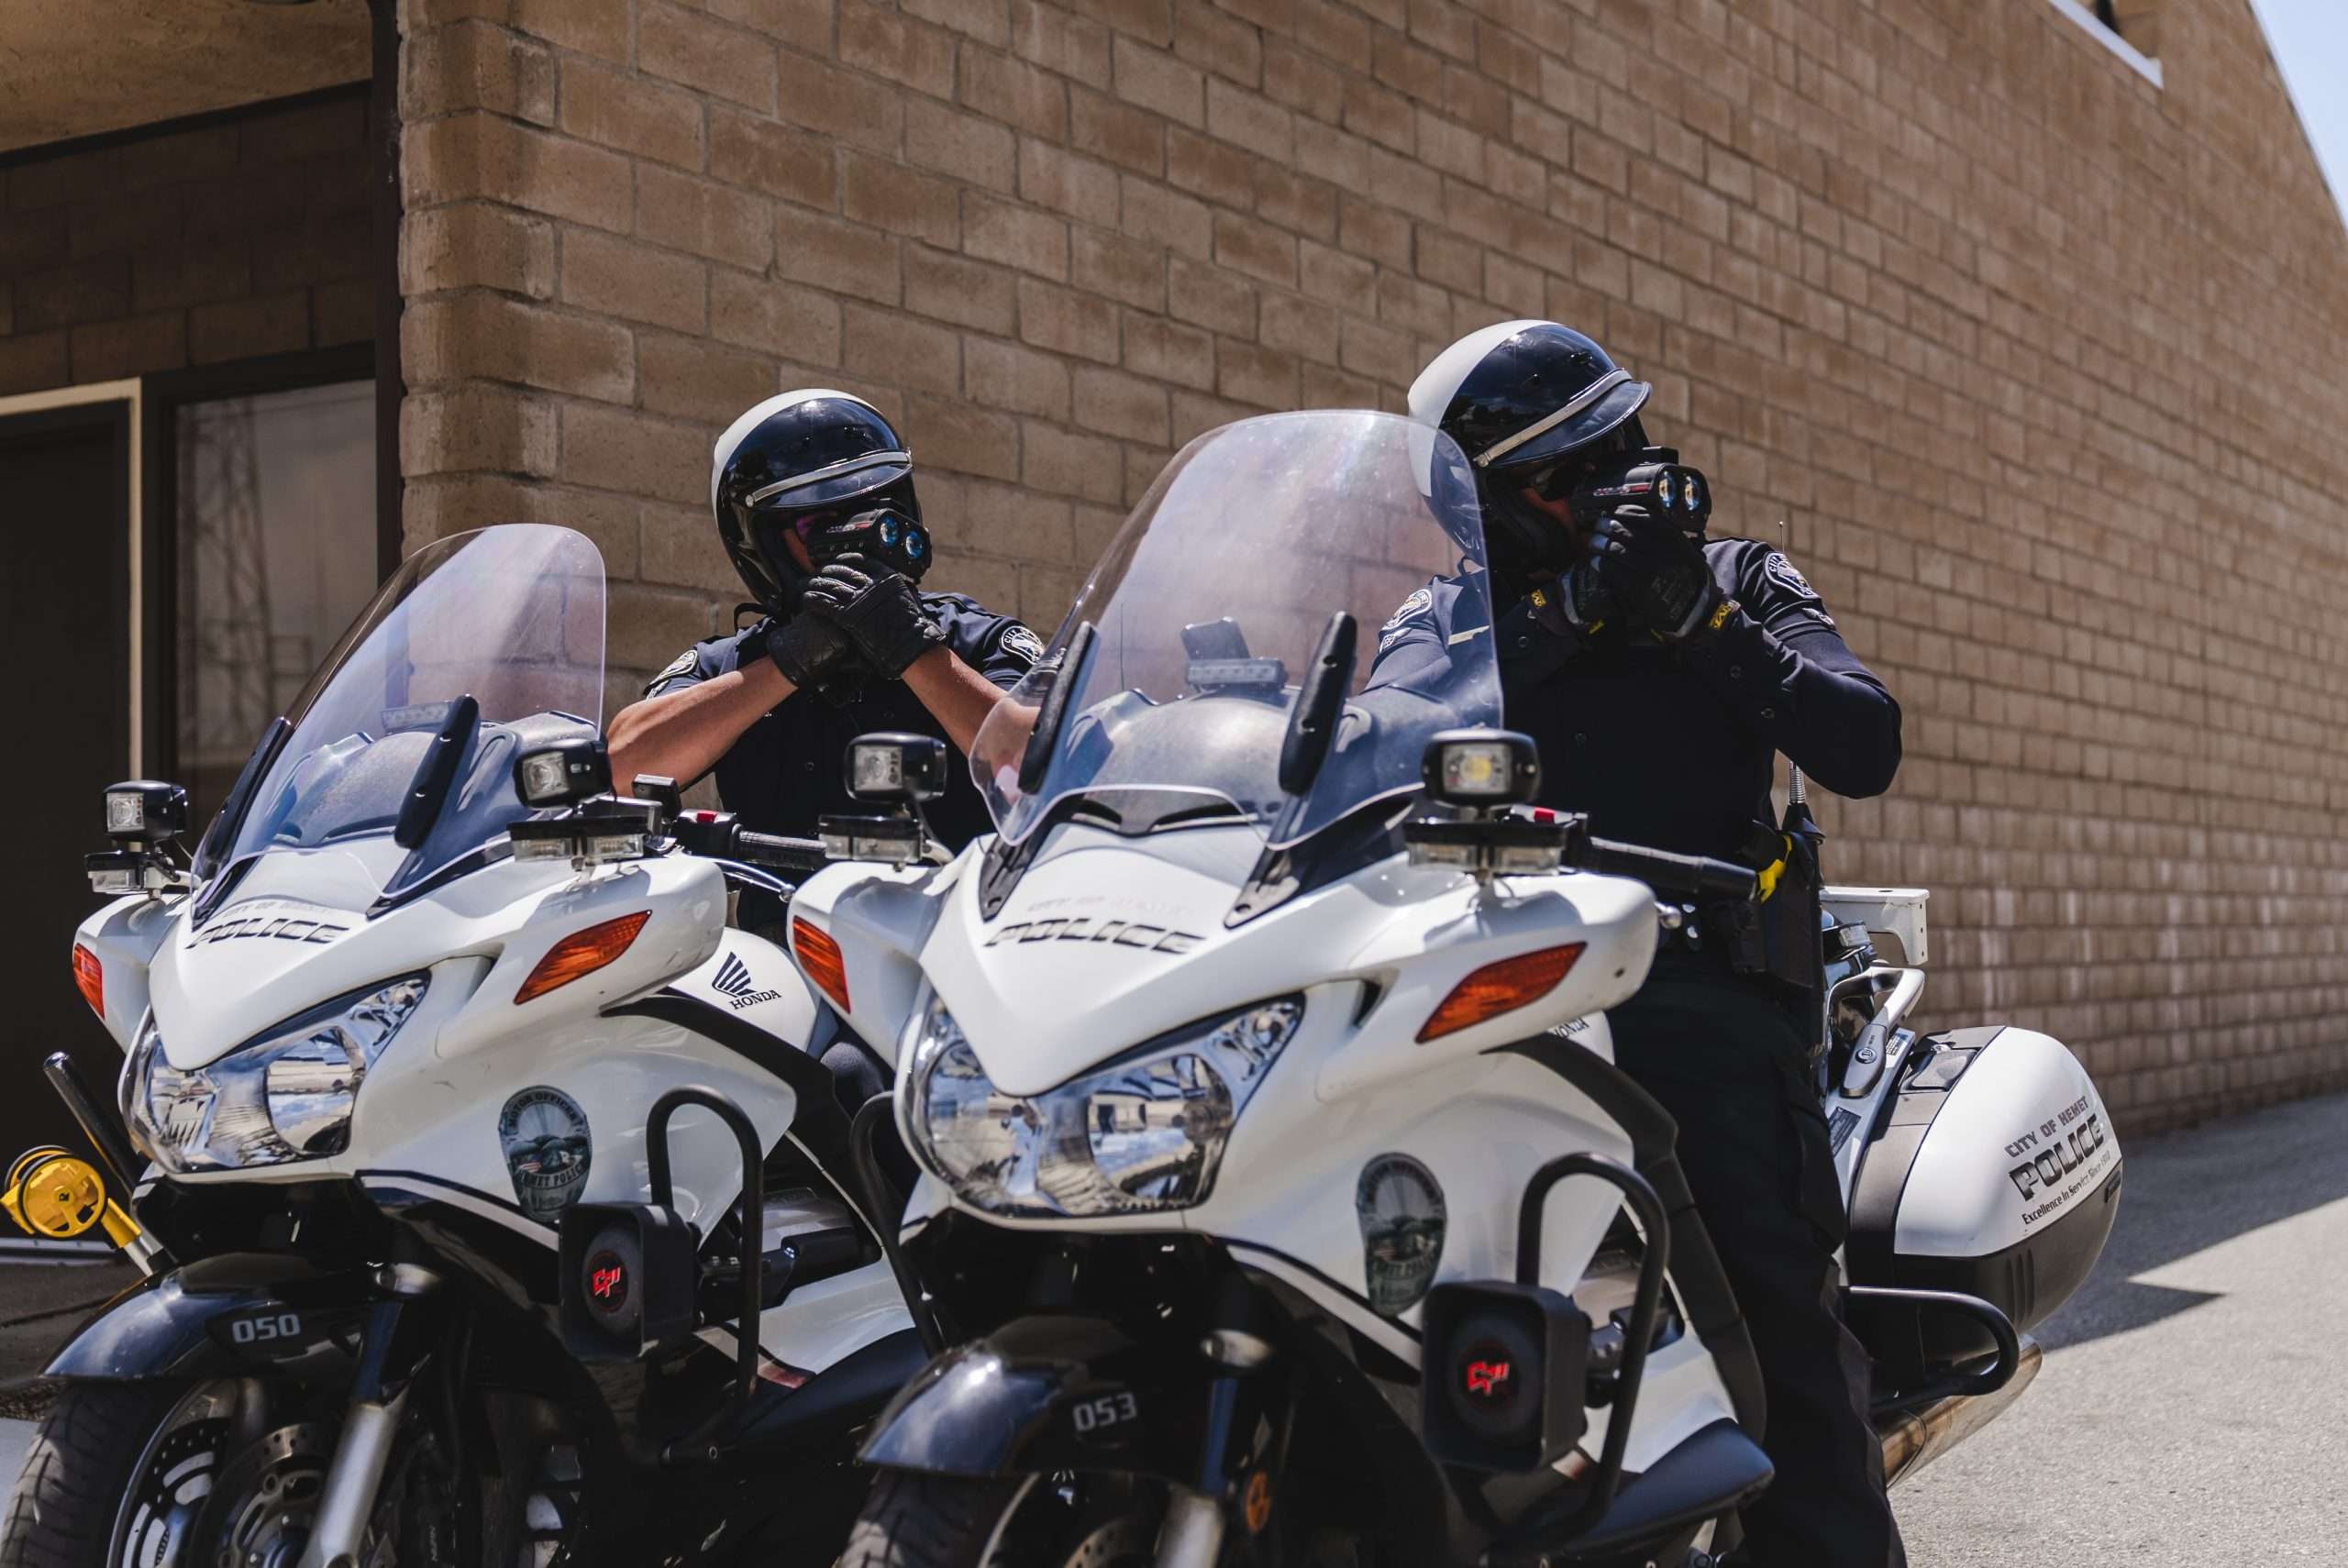 Two Hemet Police Department Motor Officers use LIDAR to determine the speed of approaching vehicles